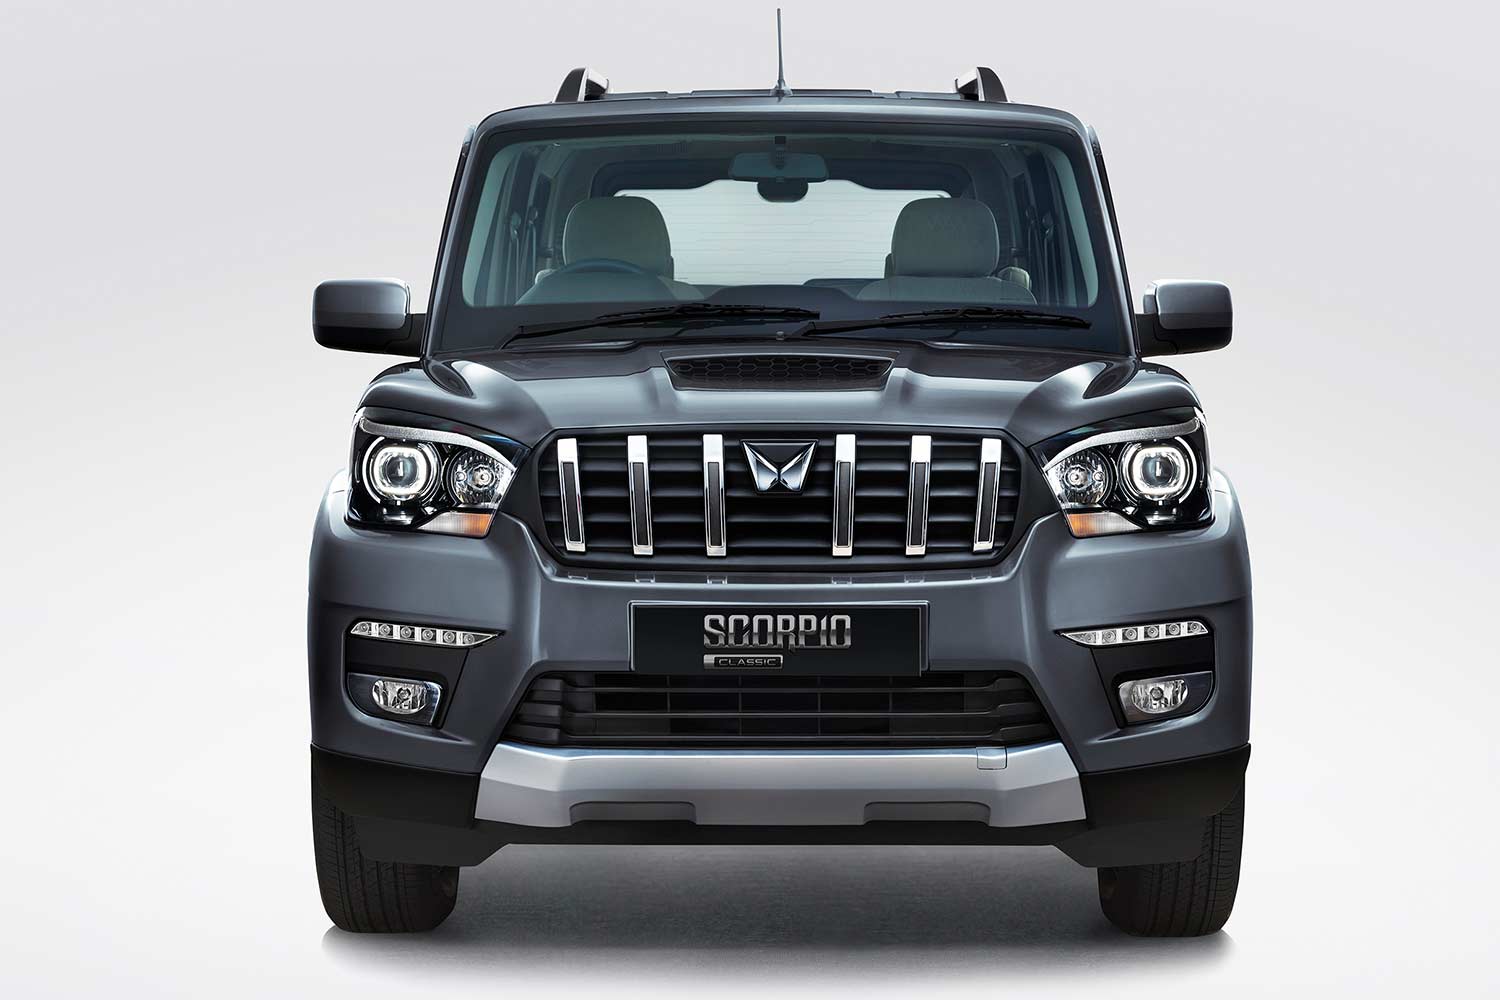 Mahindra Scorpio N Vs Classic: Which Is The Better Choice?